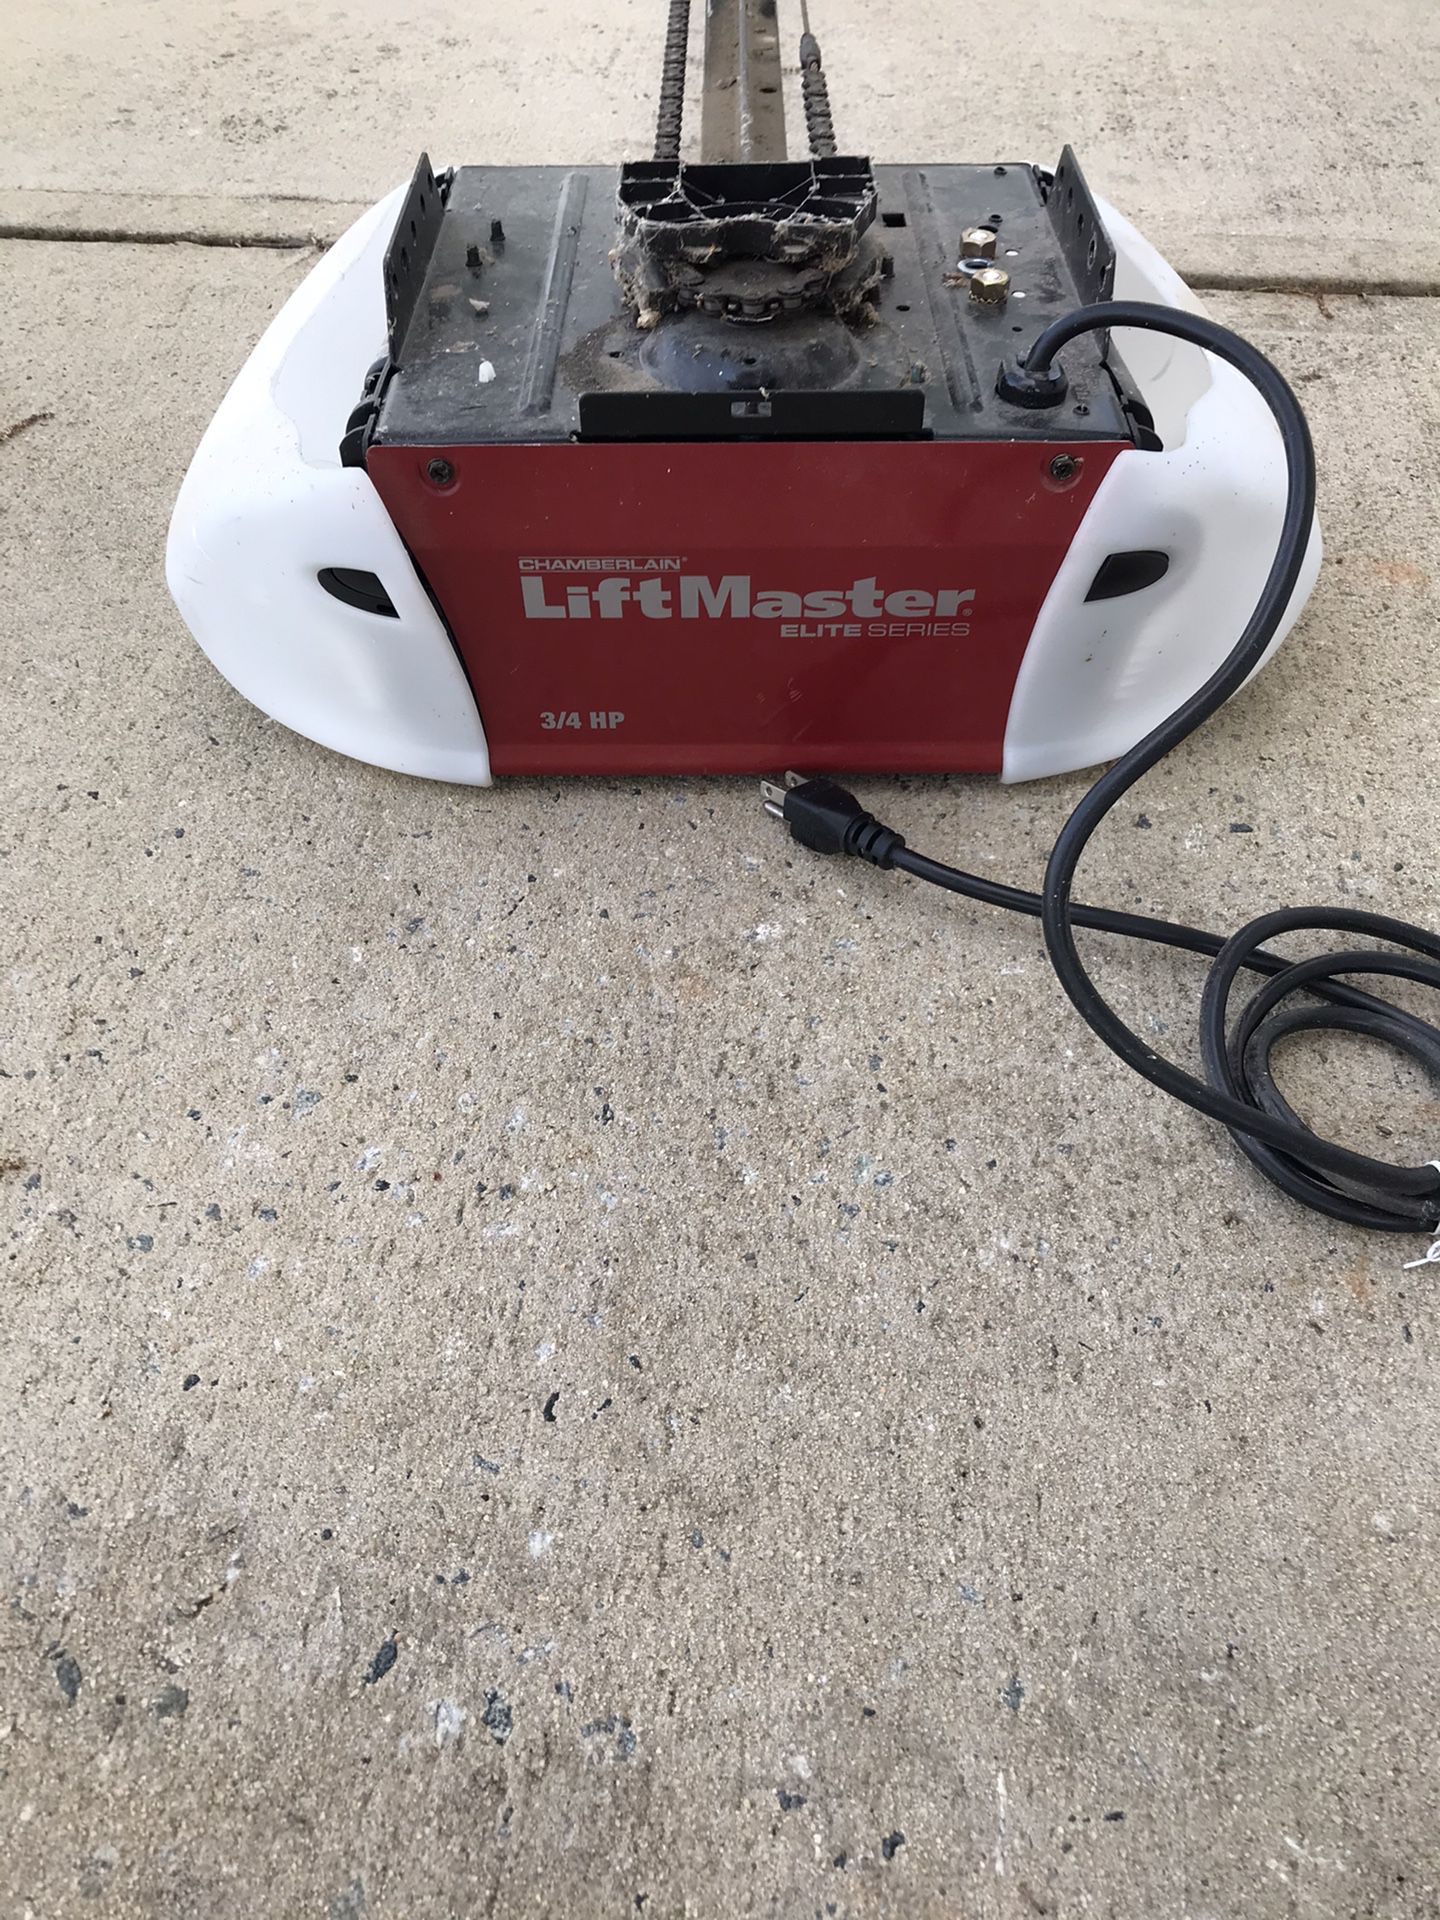 Liftmaster 3/42HP - Garage Door opener - chain driven with wall button and beam sensors